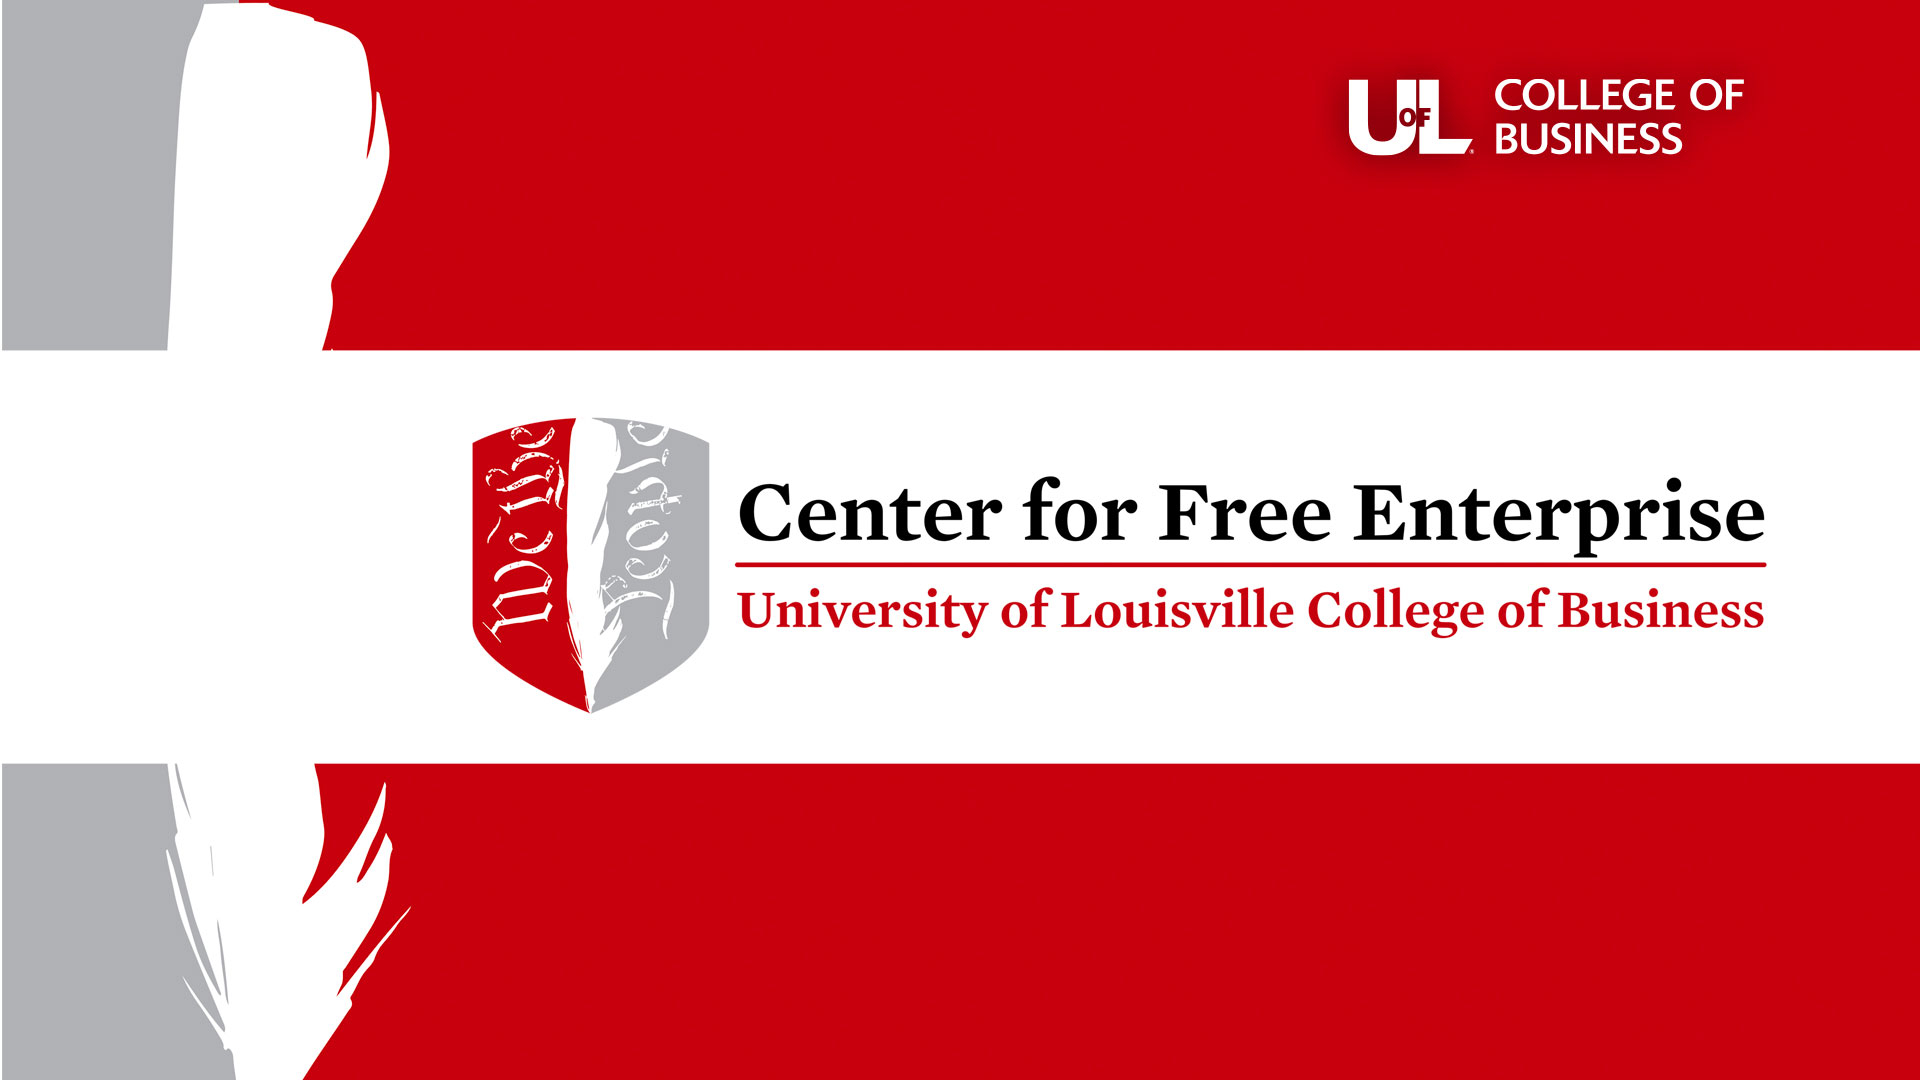 1920x1080 CoB Backgrounds University of Louisville College of Business : University of Louisville &acirc;&#128;&#147; College of Business